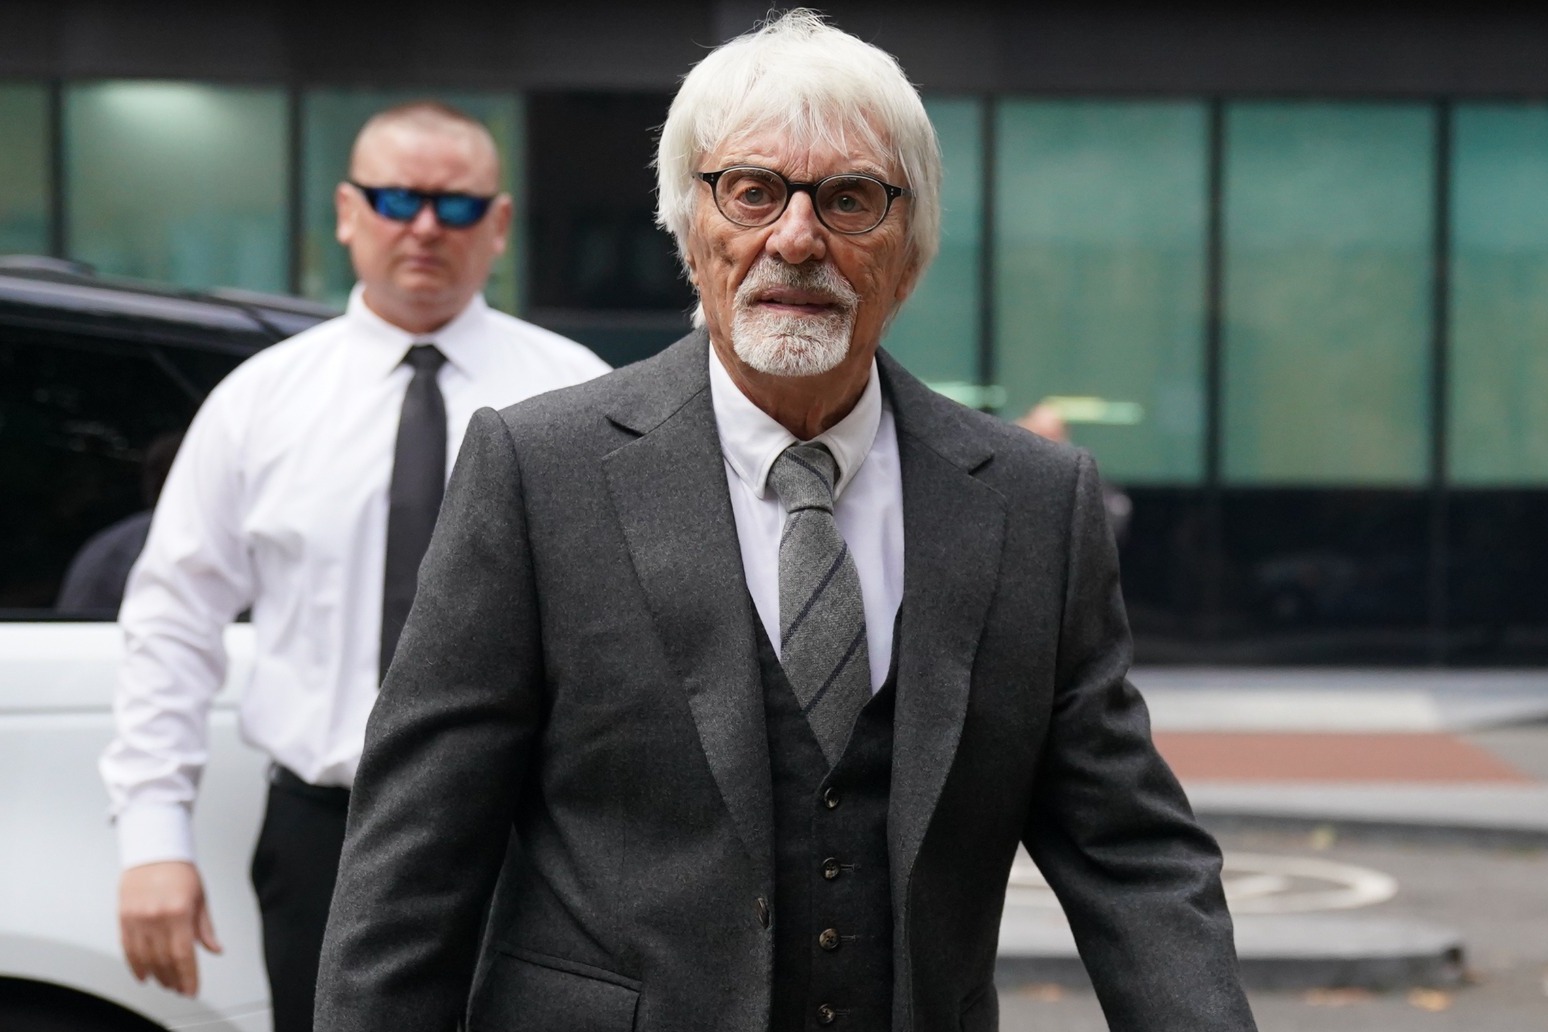 Trial date set for former F1 boss Bernie Ecclestone over £400m fraud charge 